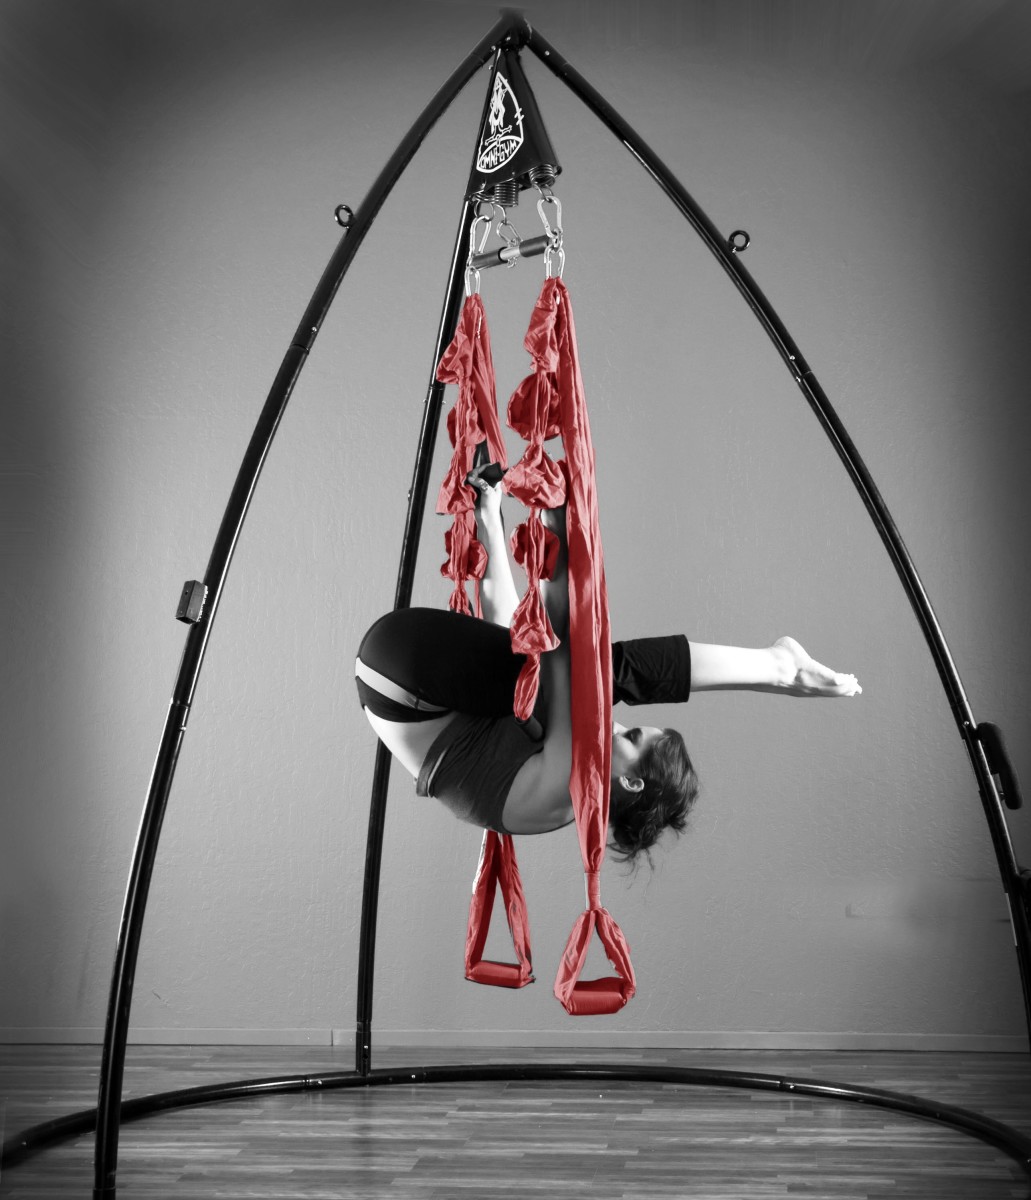 How I Installed My Aerial Yoga Swing Caloriebee